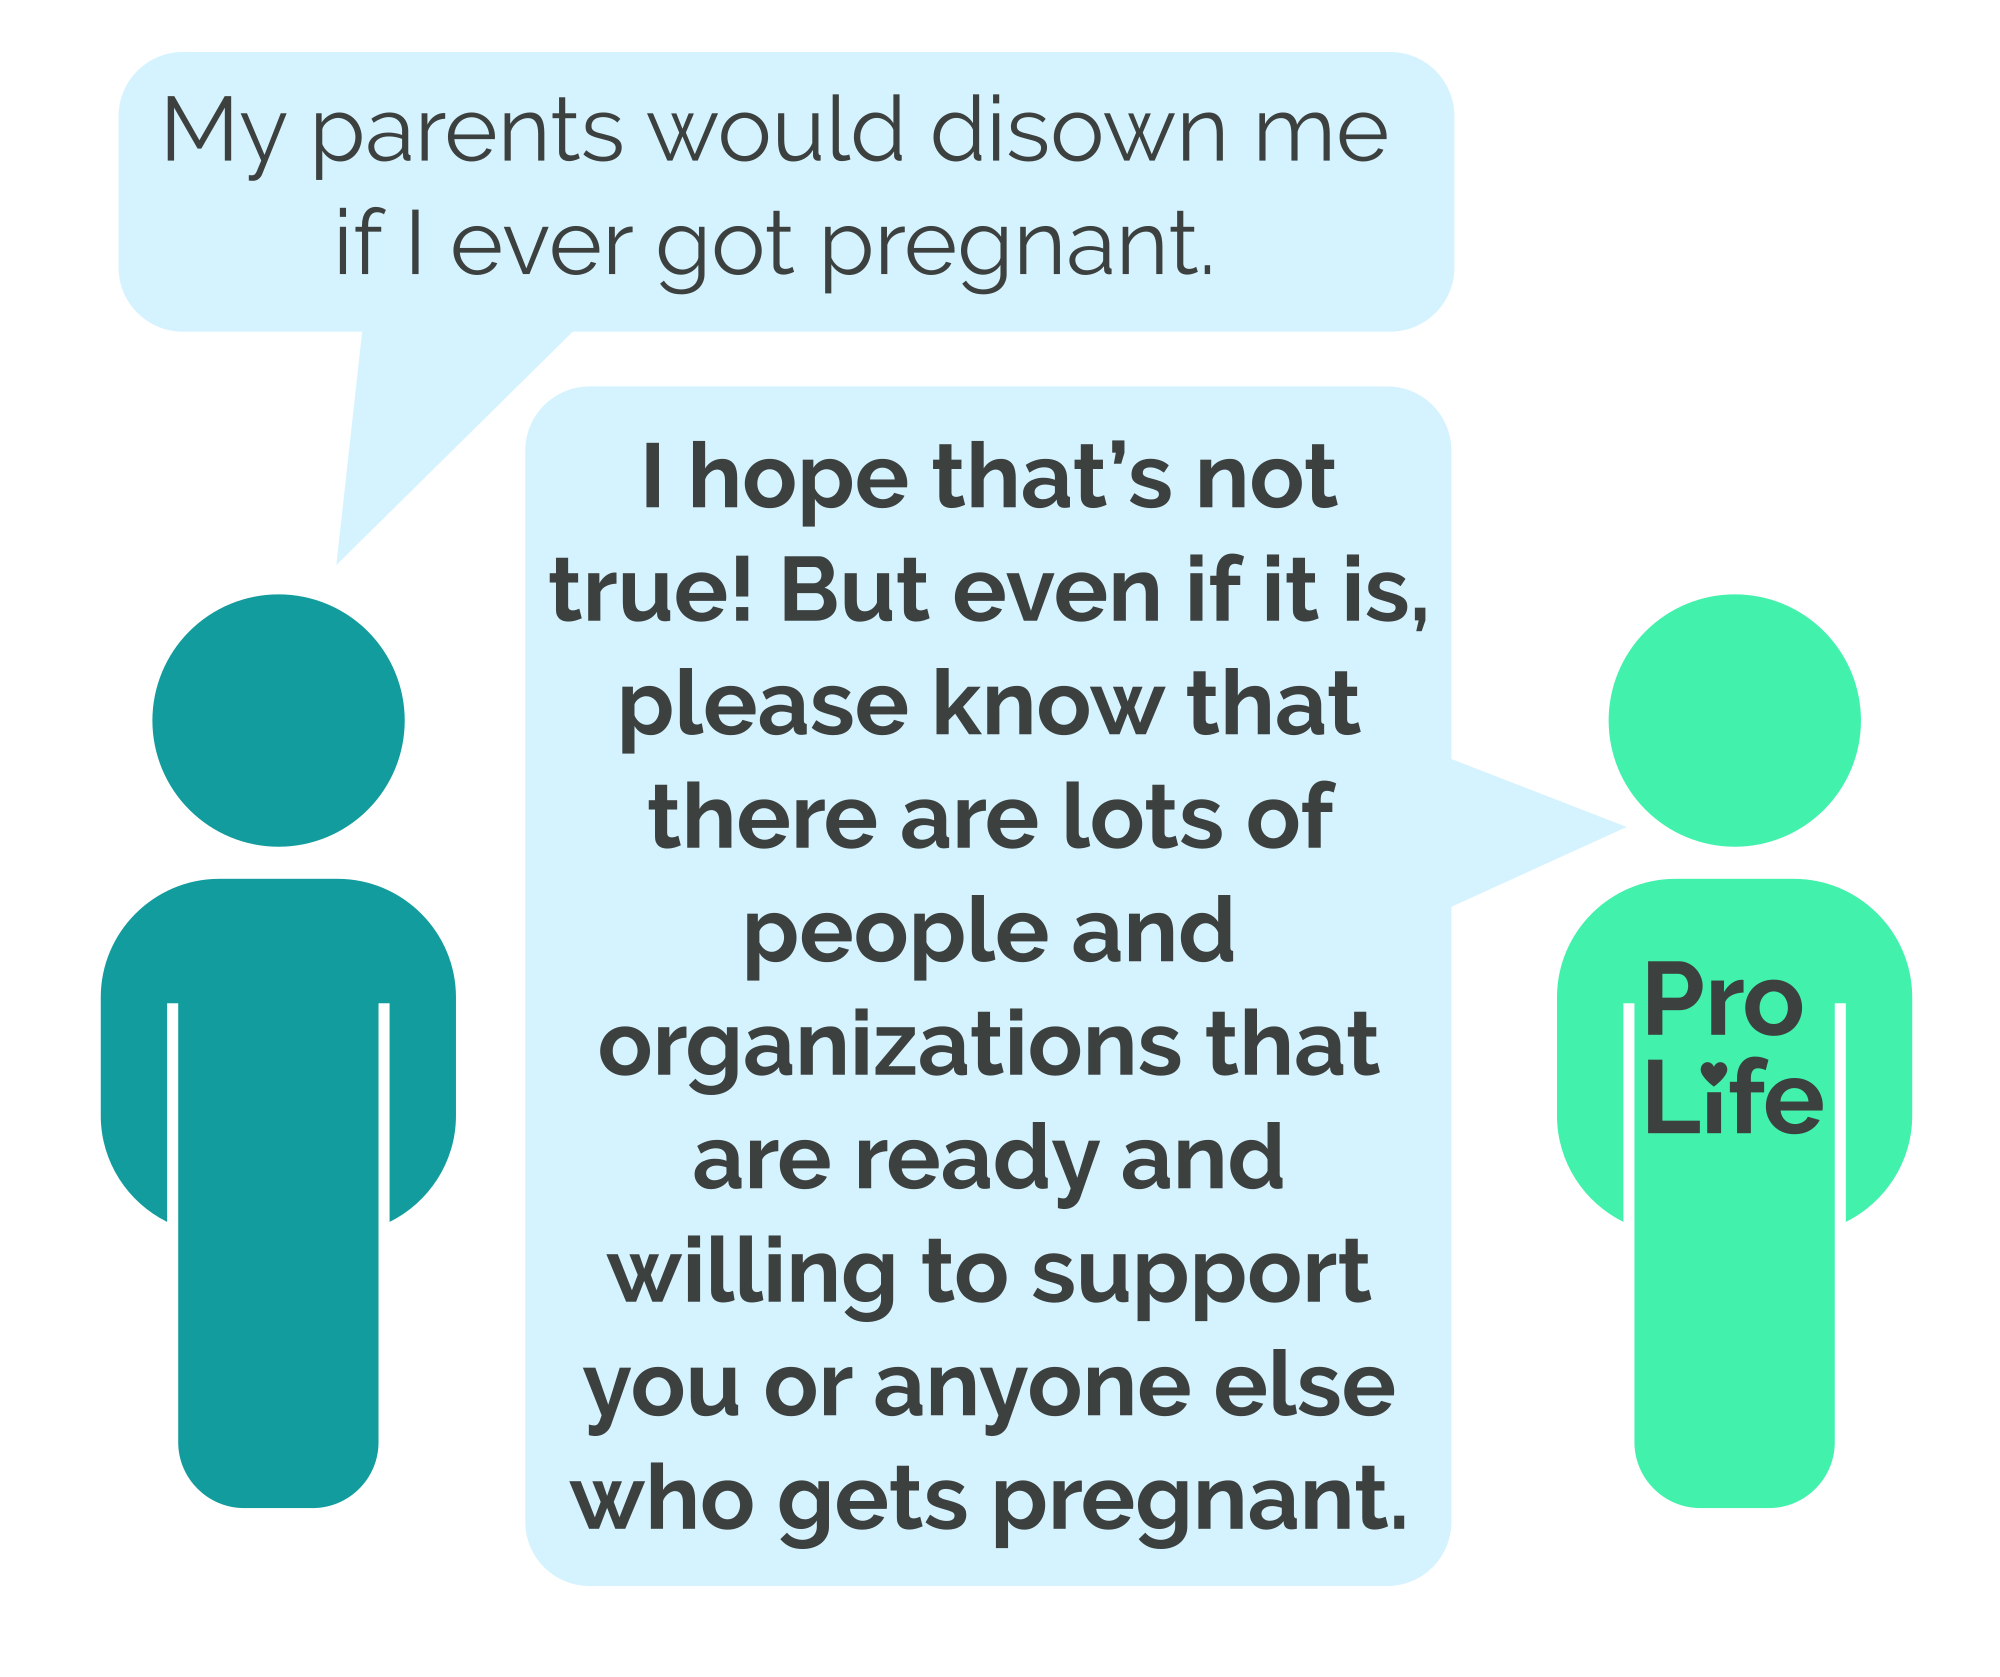 Person 1: My parents would disown me if I ever got pregnant. Person 2 (our hero): I hope that’s not true! But even if it is, please know that there are lots of people and organizations that are ready and willing to support you or anyone else who gets pregnant.